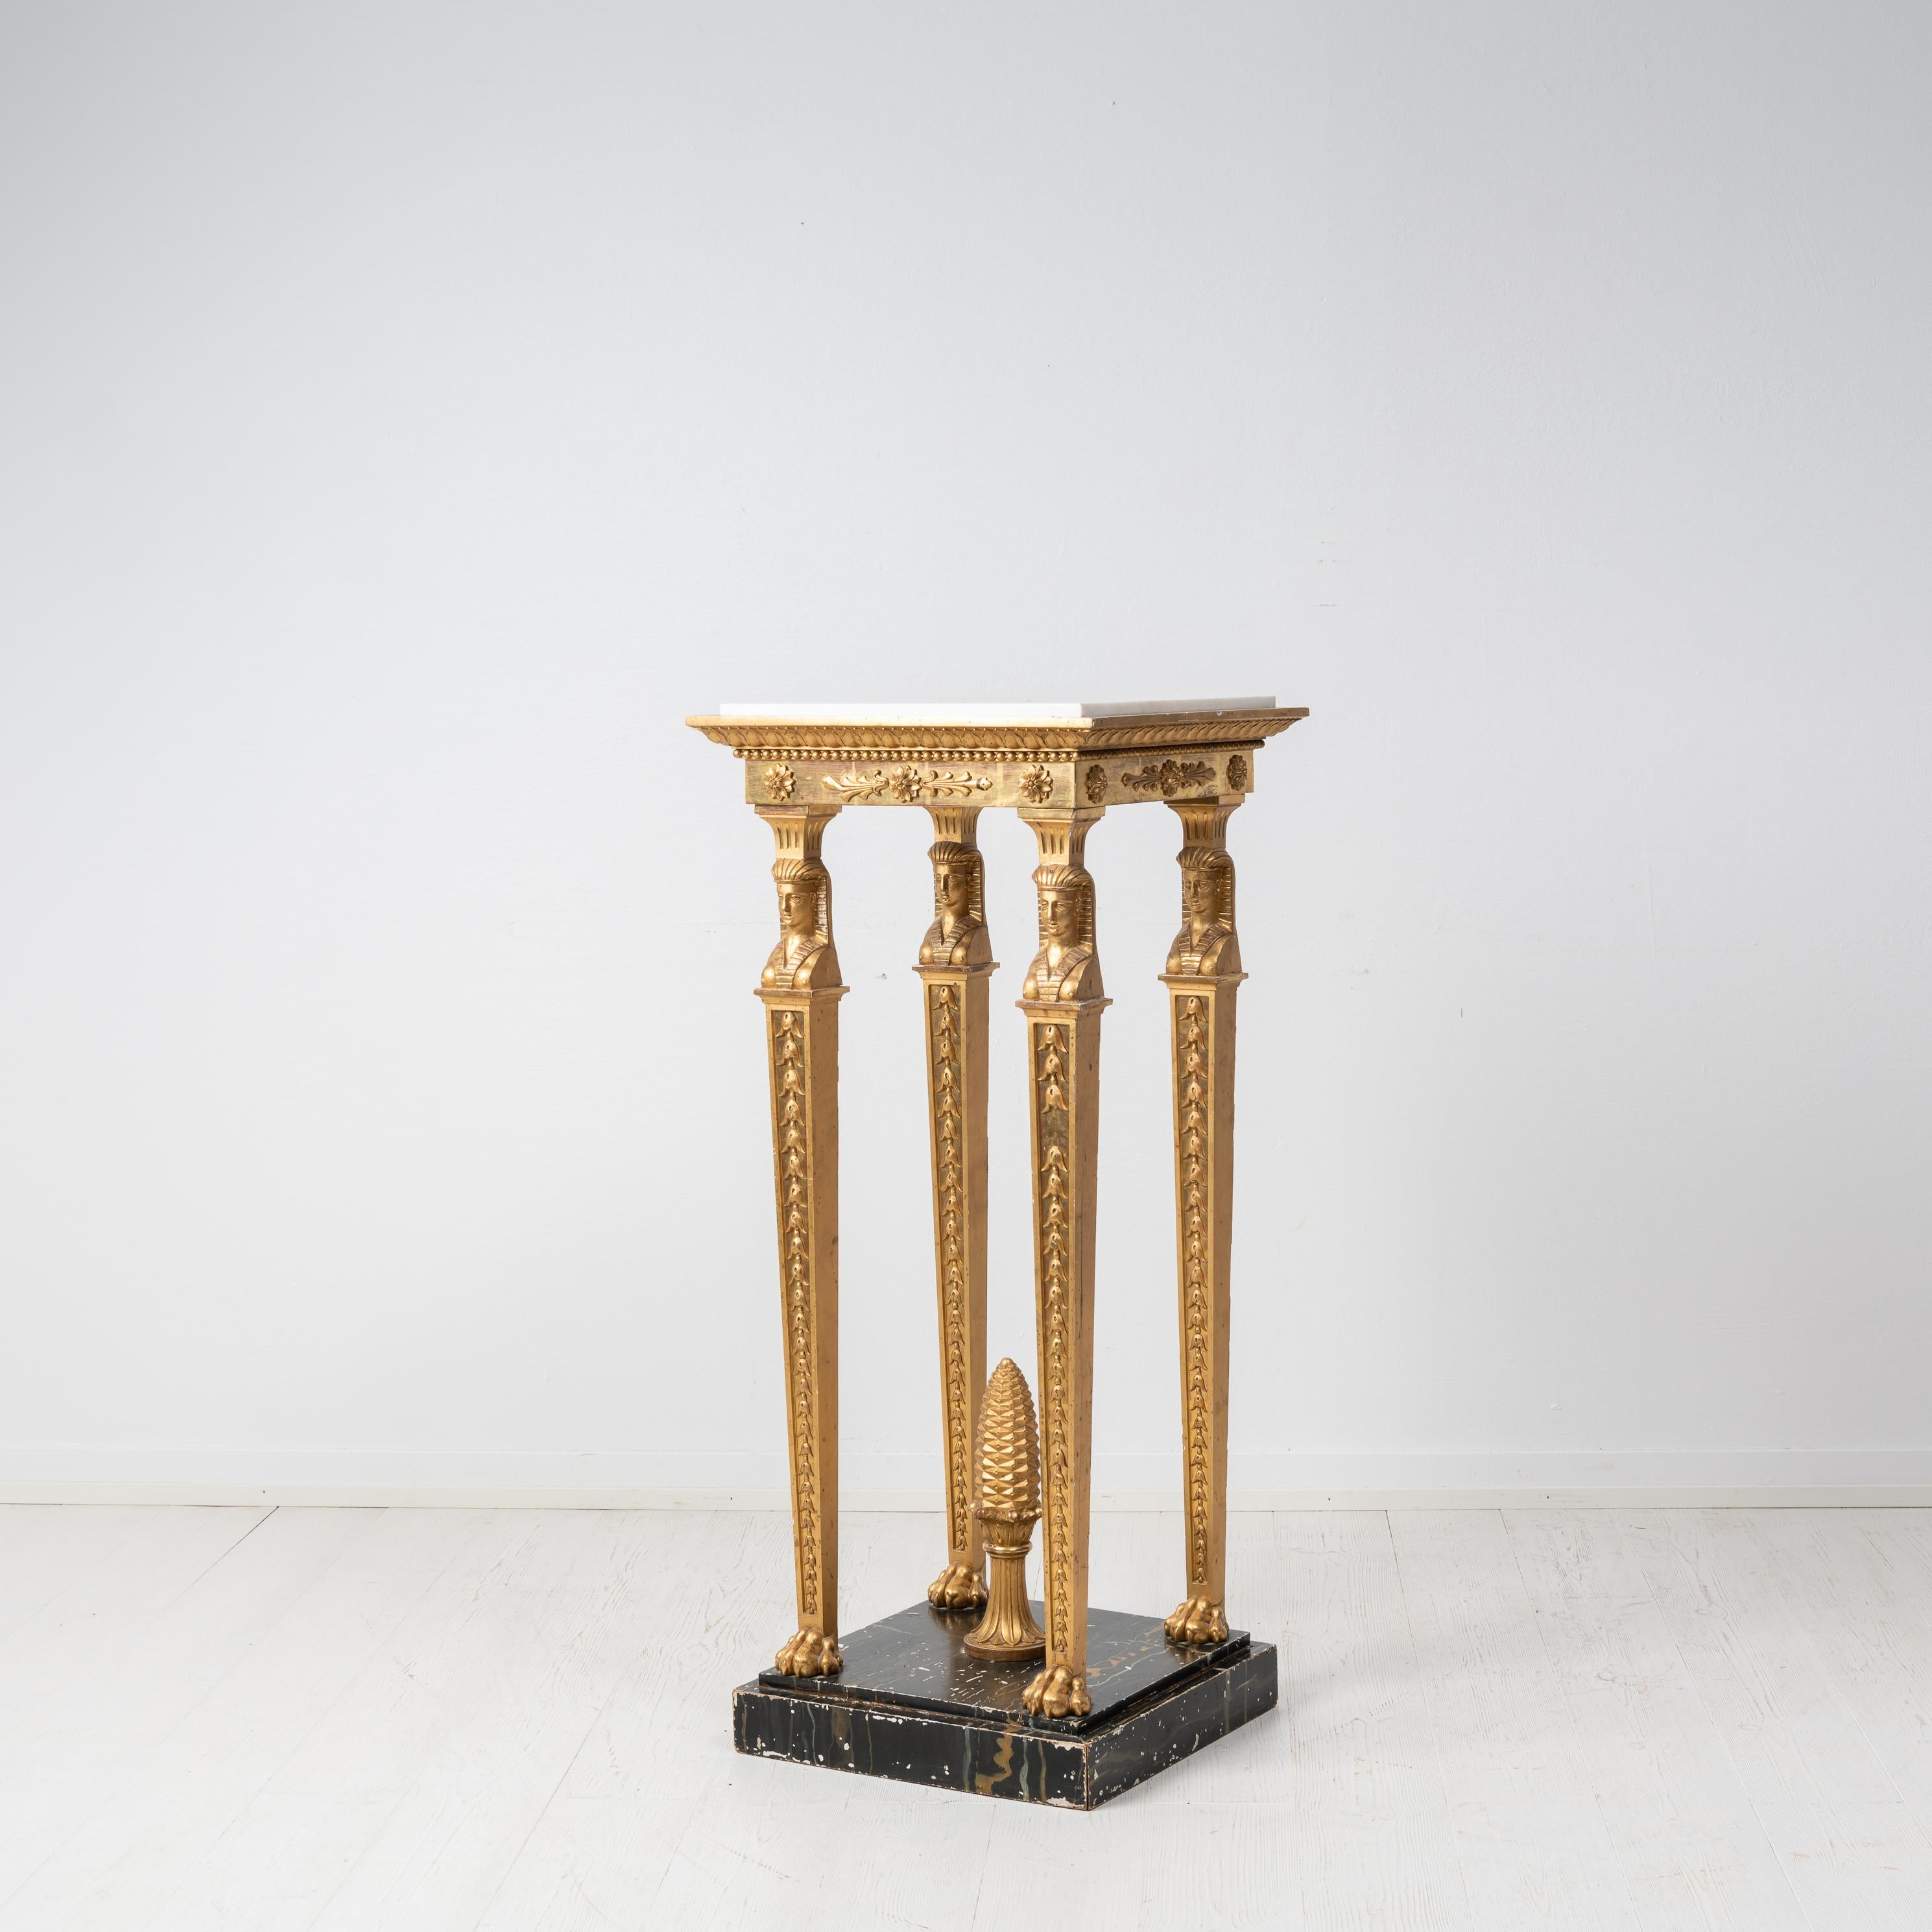 Antique Swedish Empire Gilded Marble Pedestal or Geridong In Good Condition For Sale In Kramfors, SE